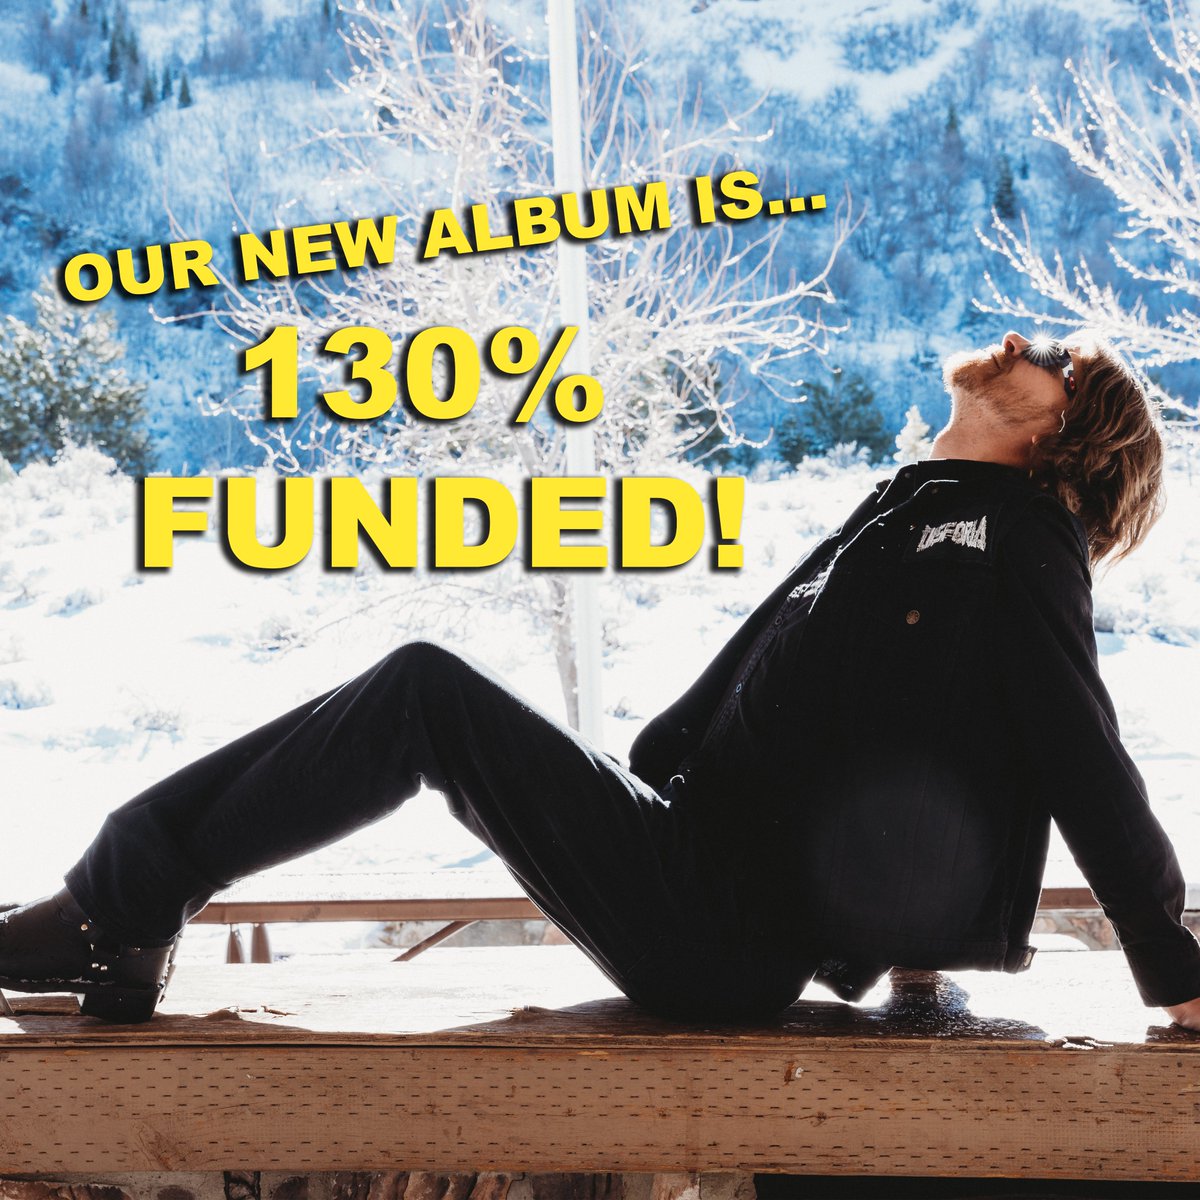 🥳 Our 7th full-length album has officially been funded! Because of YOU, our seventh full-length album 'Concord' is 130% funded. To say we're humbled and grateful is a massive understatement. From the bottom of our hearts, thank you! 💗 More info here: facebook.com/judicatormetal/